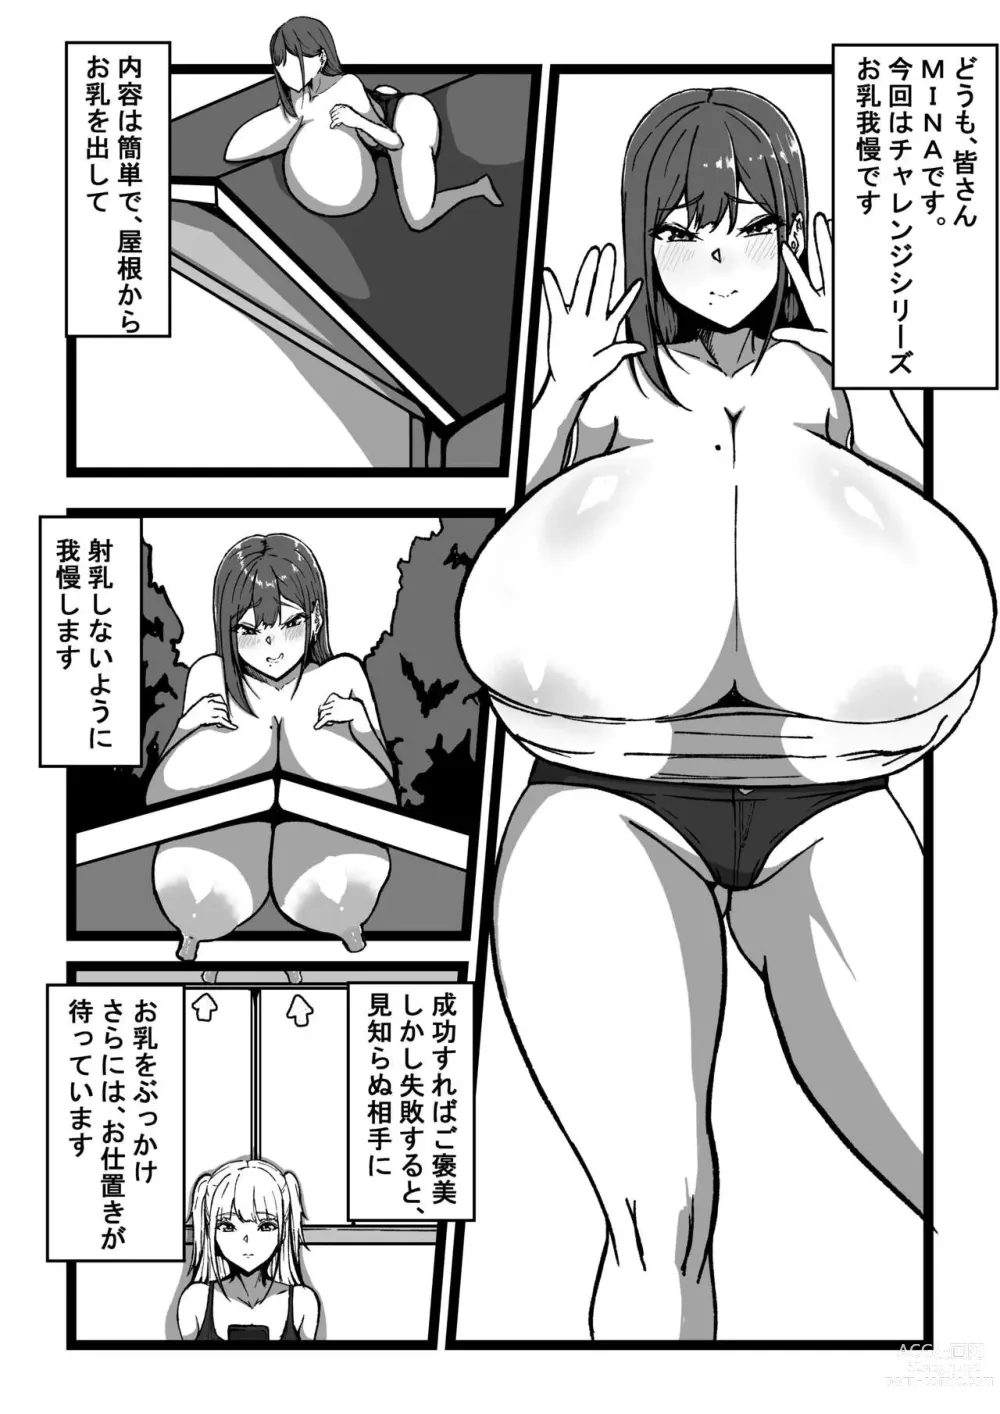 Page 3 of doujinshi dailycattle Vol.1MINA